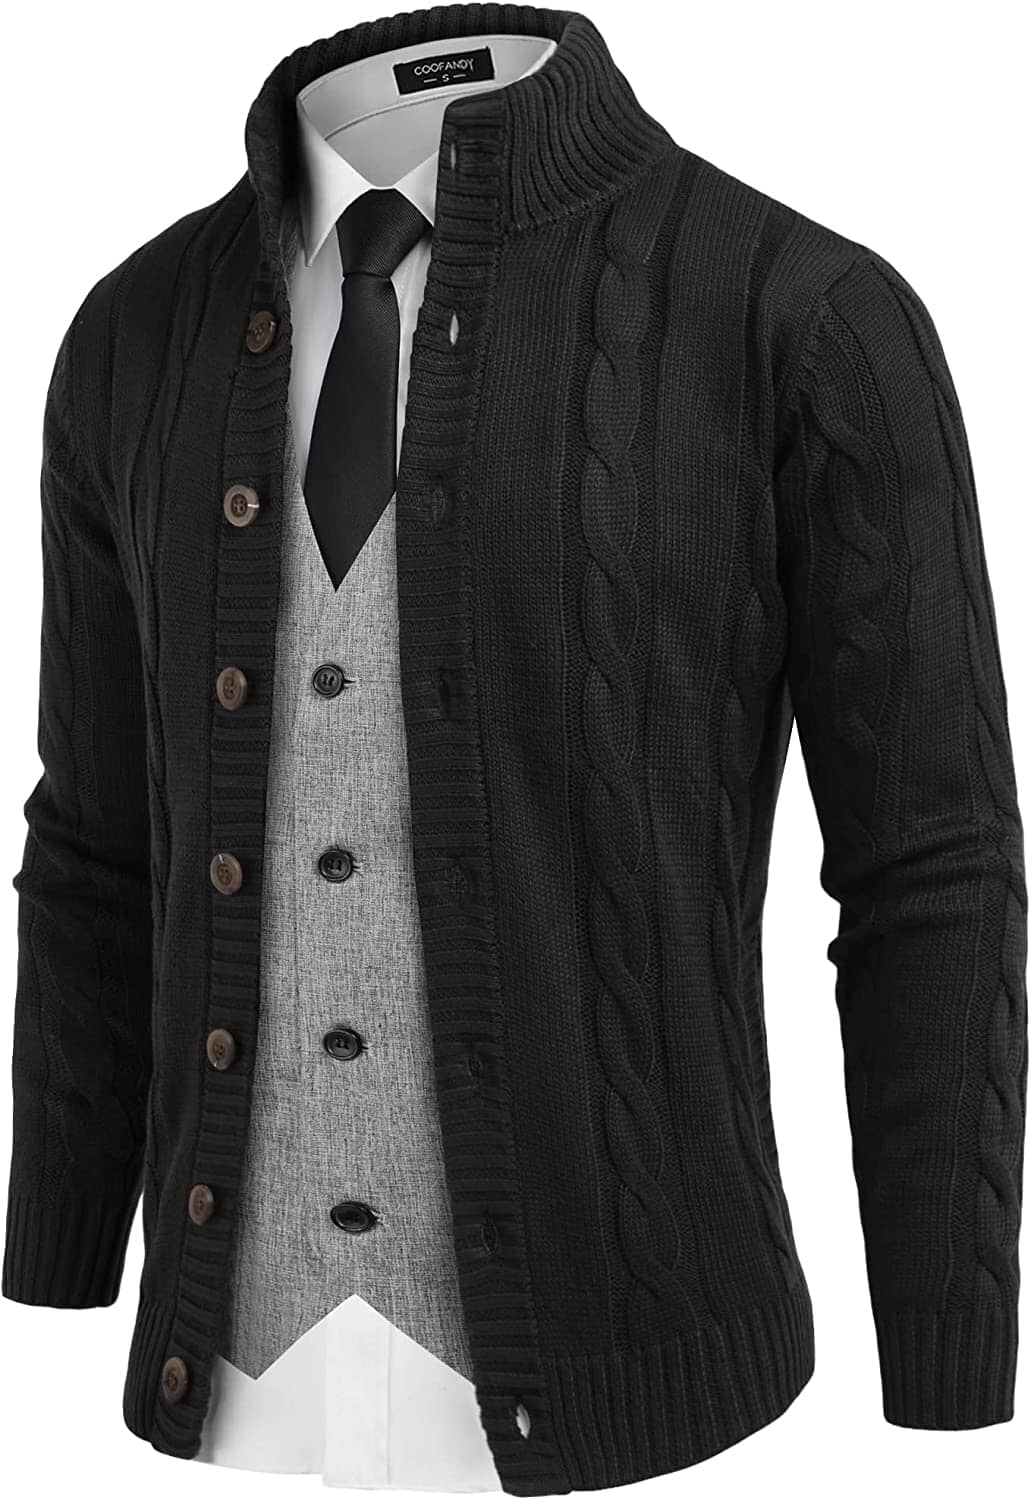 Coofandy Cardigan Cable Knitted Button Down Sweater (US Only) Sweaters COOFANDY Store Black S 